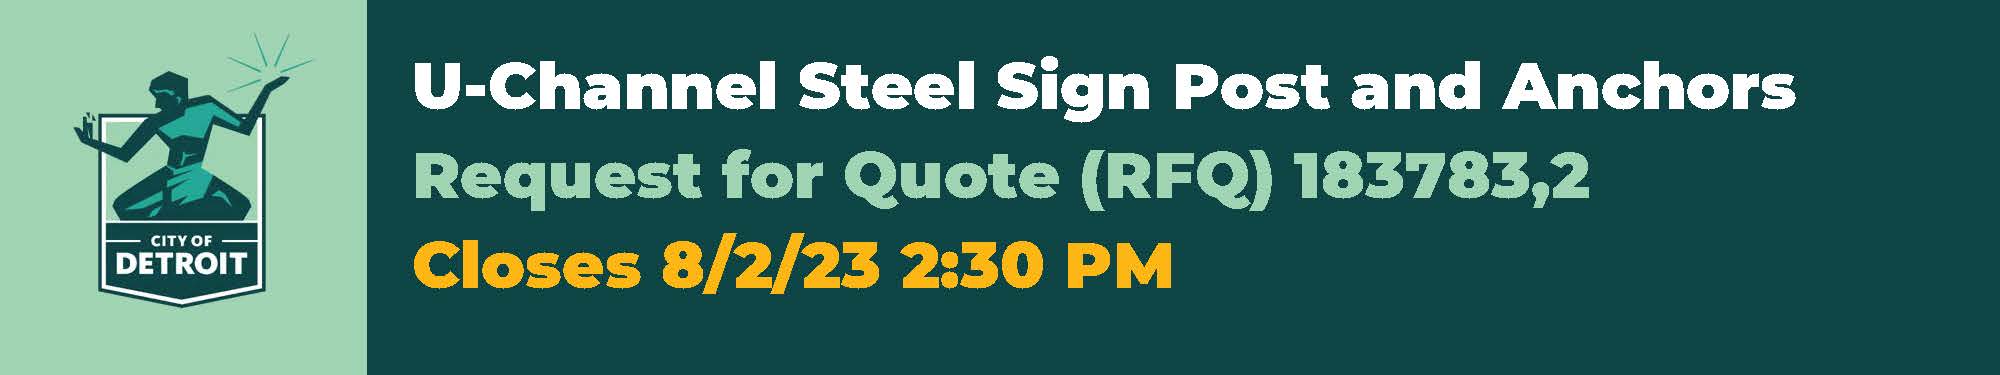 Take Part: U-Channel Steel Sign Post and Anchors